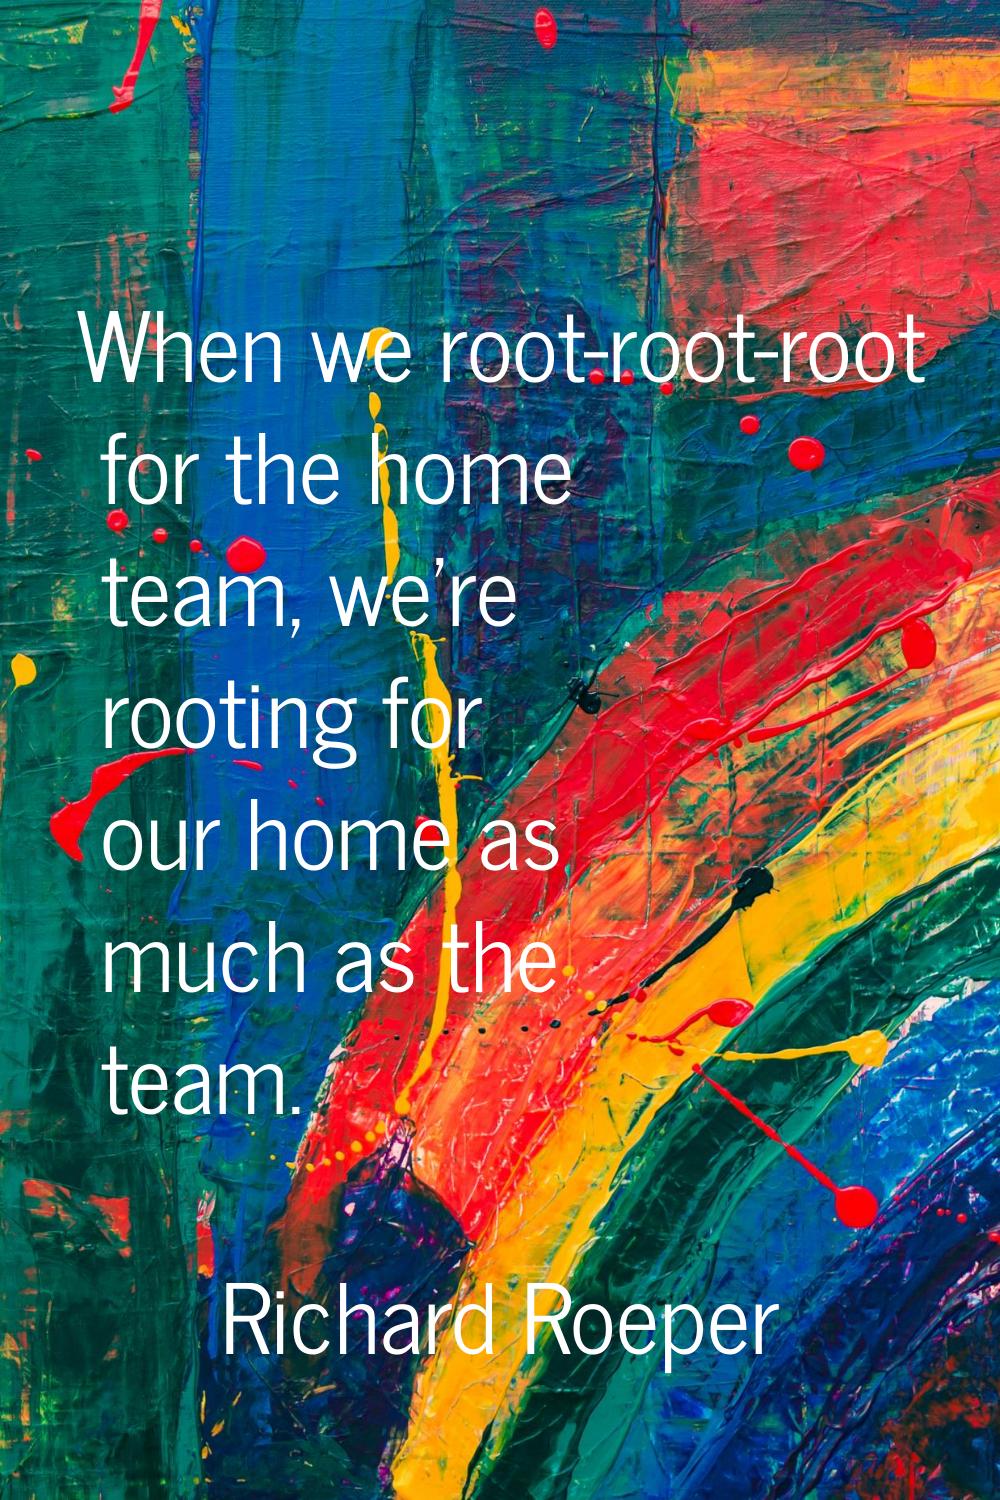 When we root-root-root for the home team, we're rooting for our home as much as the team.